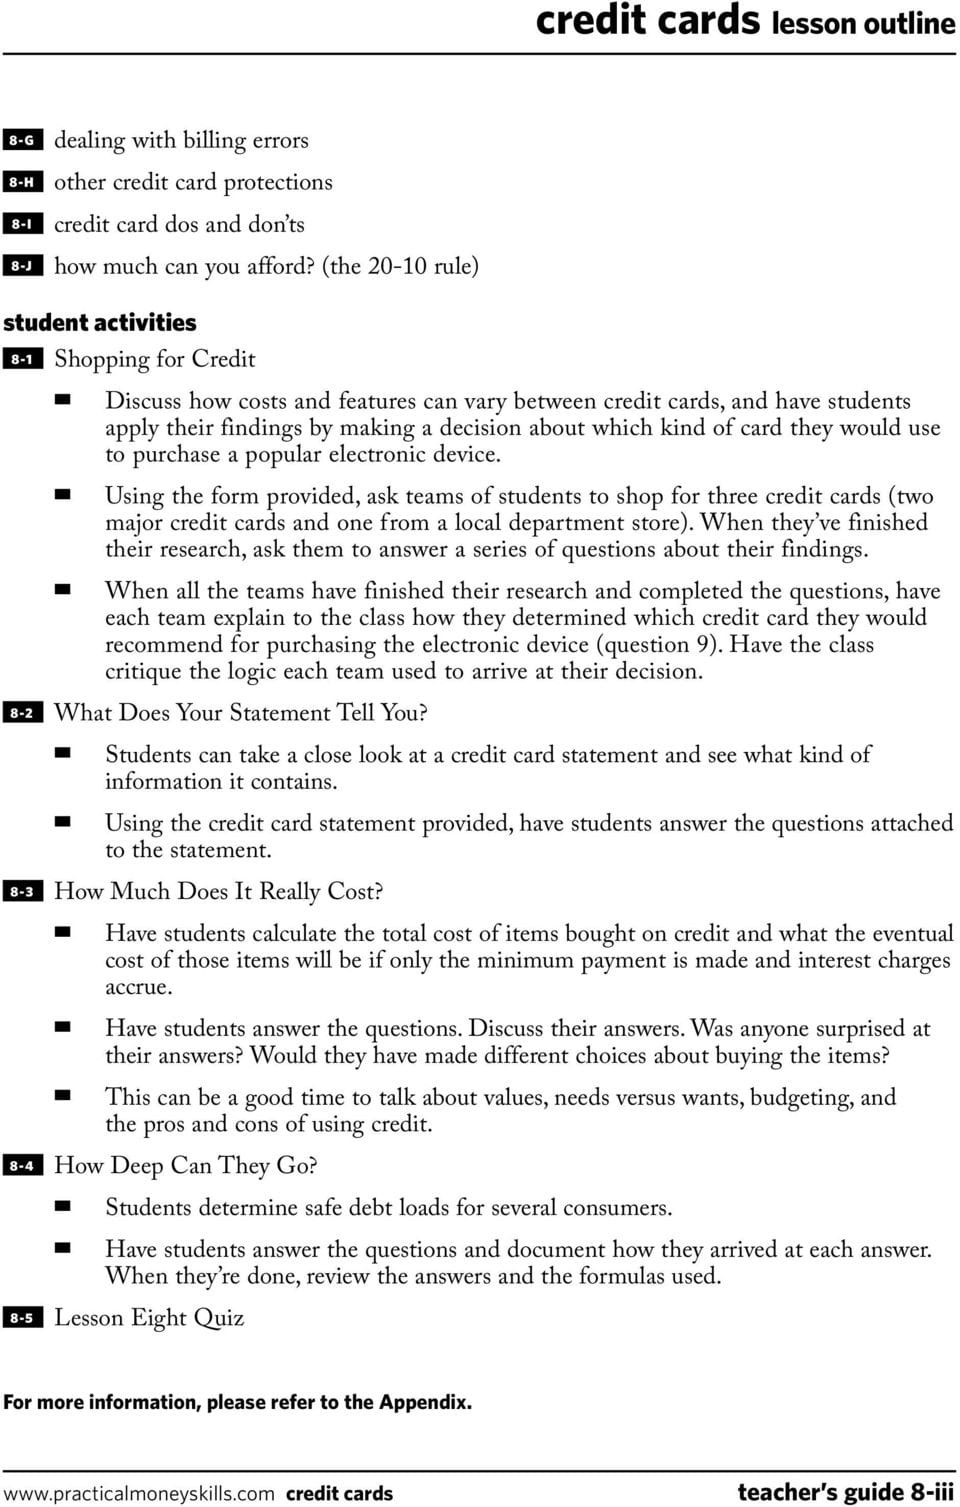 Teacher's Guide Lesson Eight Credit Cards 0409  Pdf